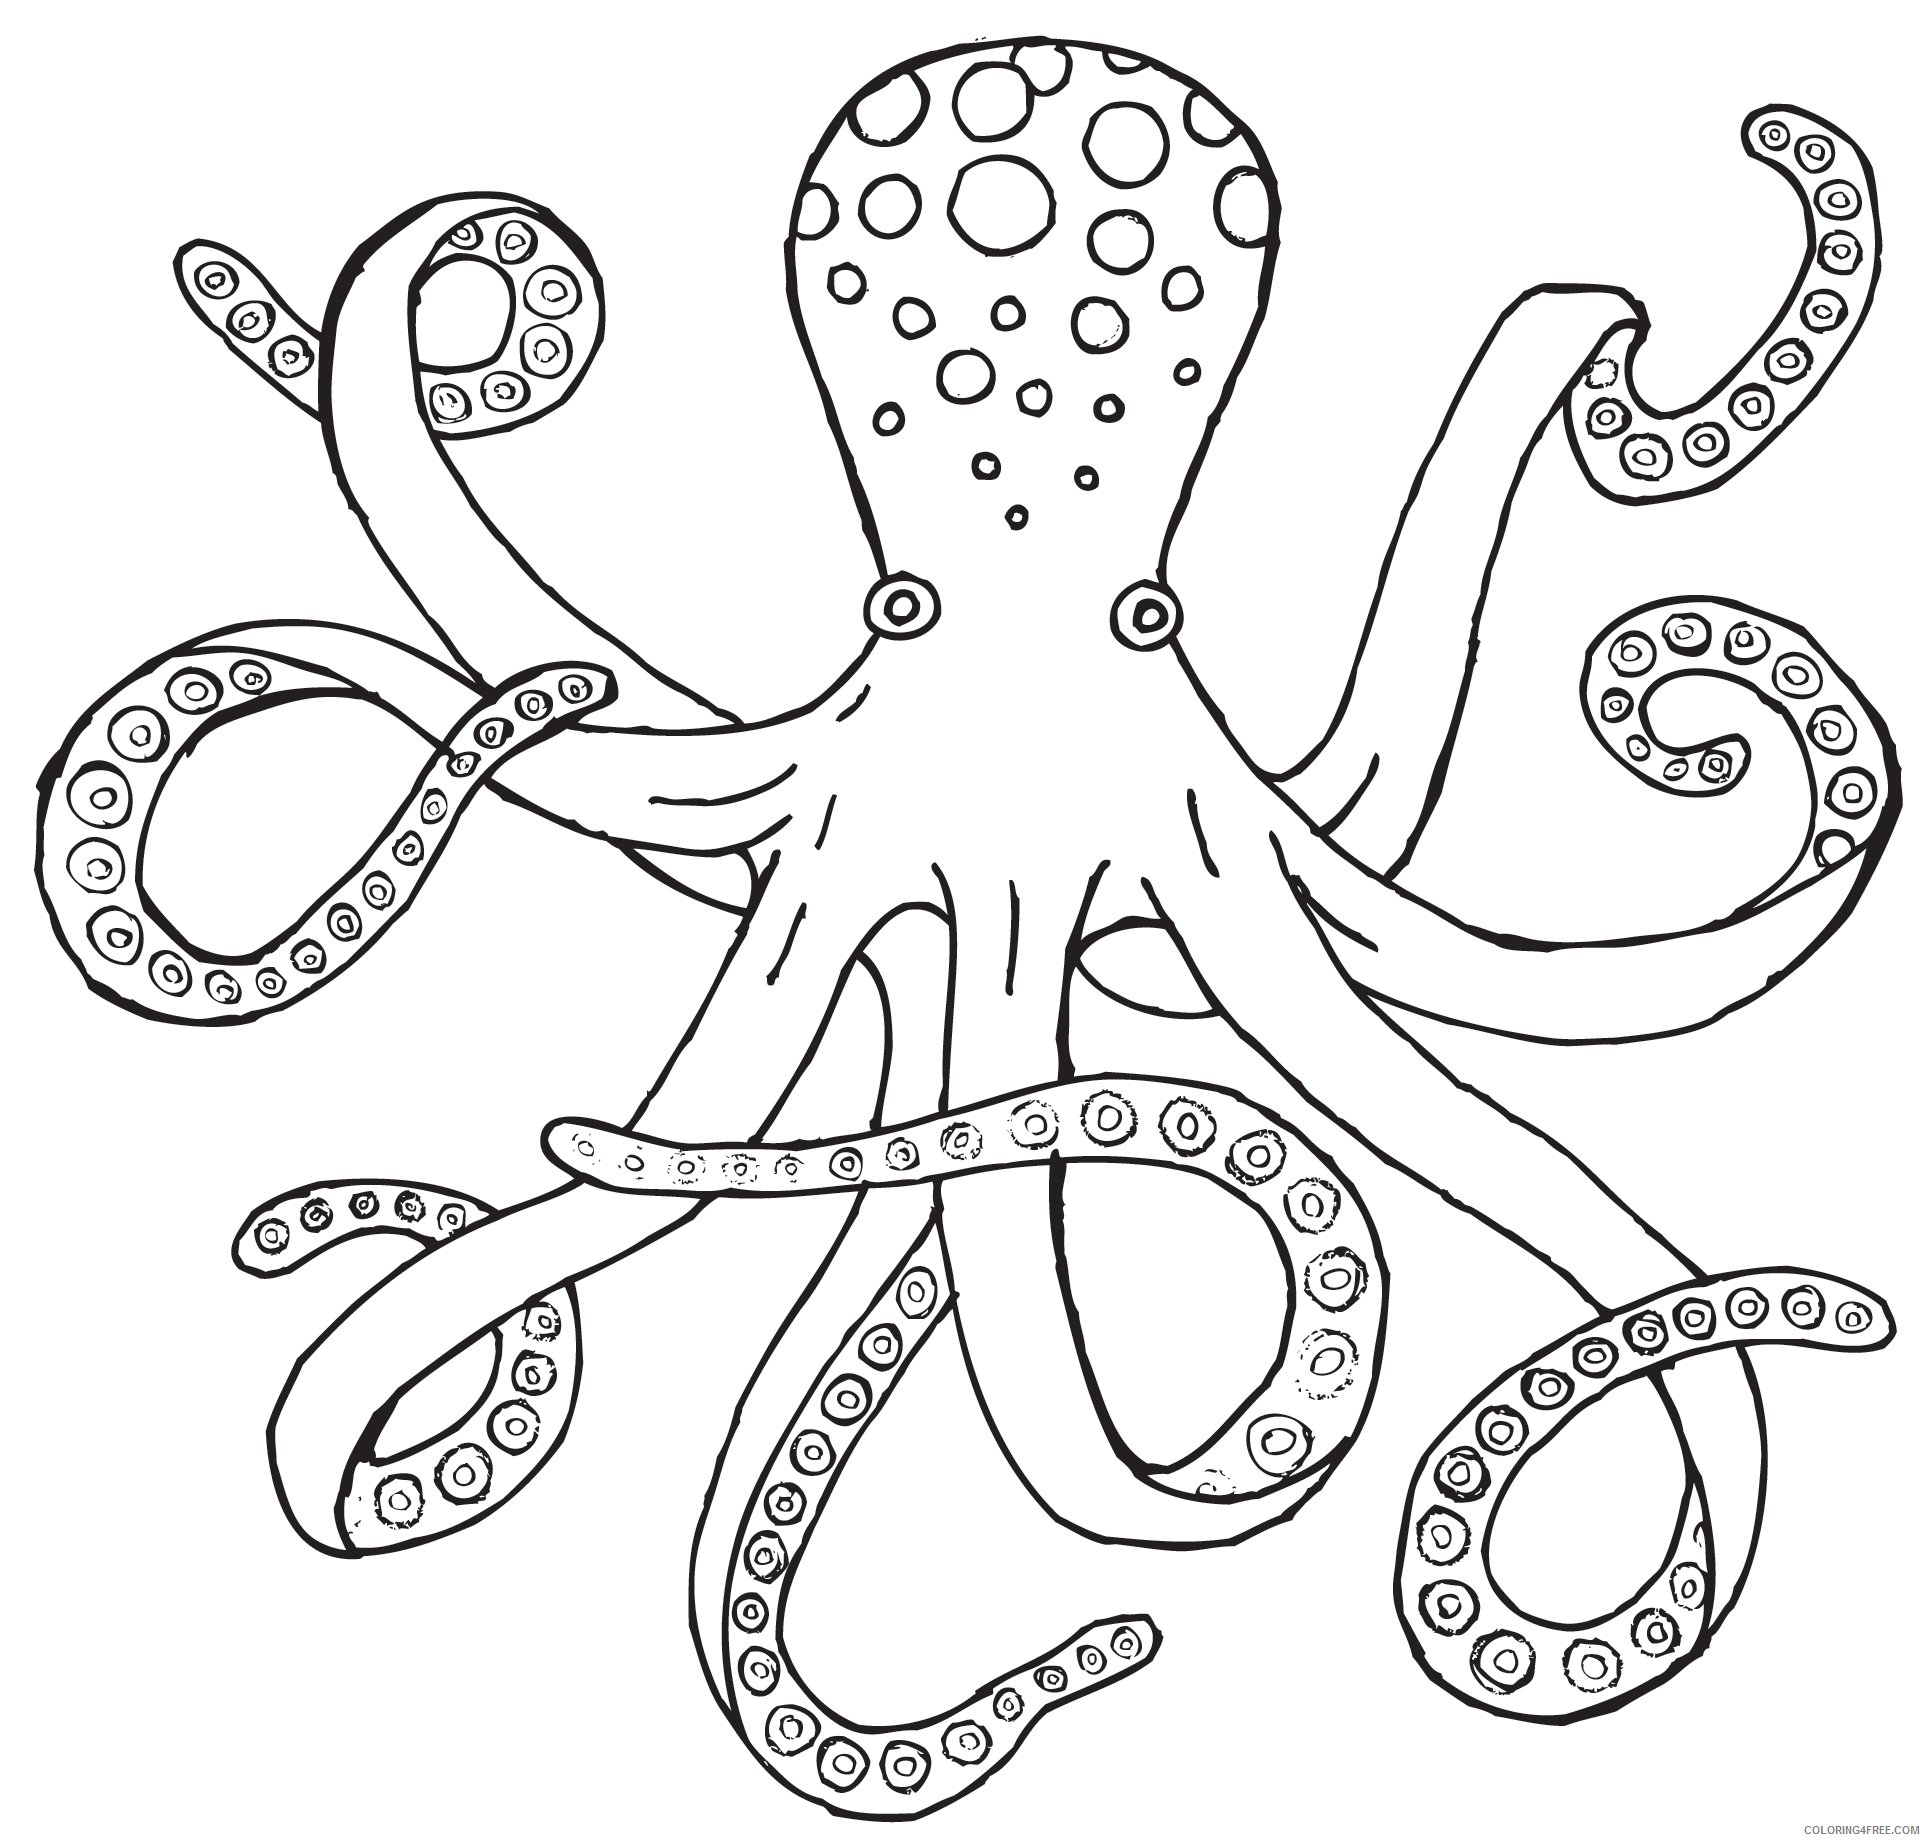 Octopus Outline Coloring Pages octopuses live only 1 3 Printable Coloring4free